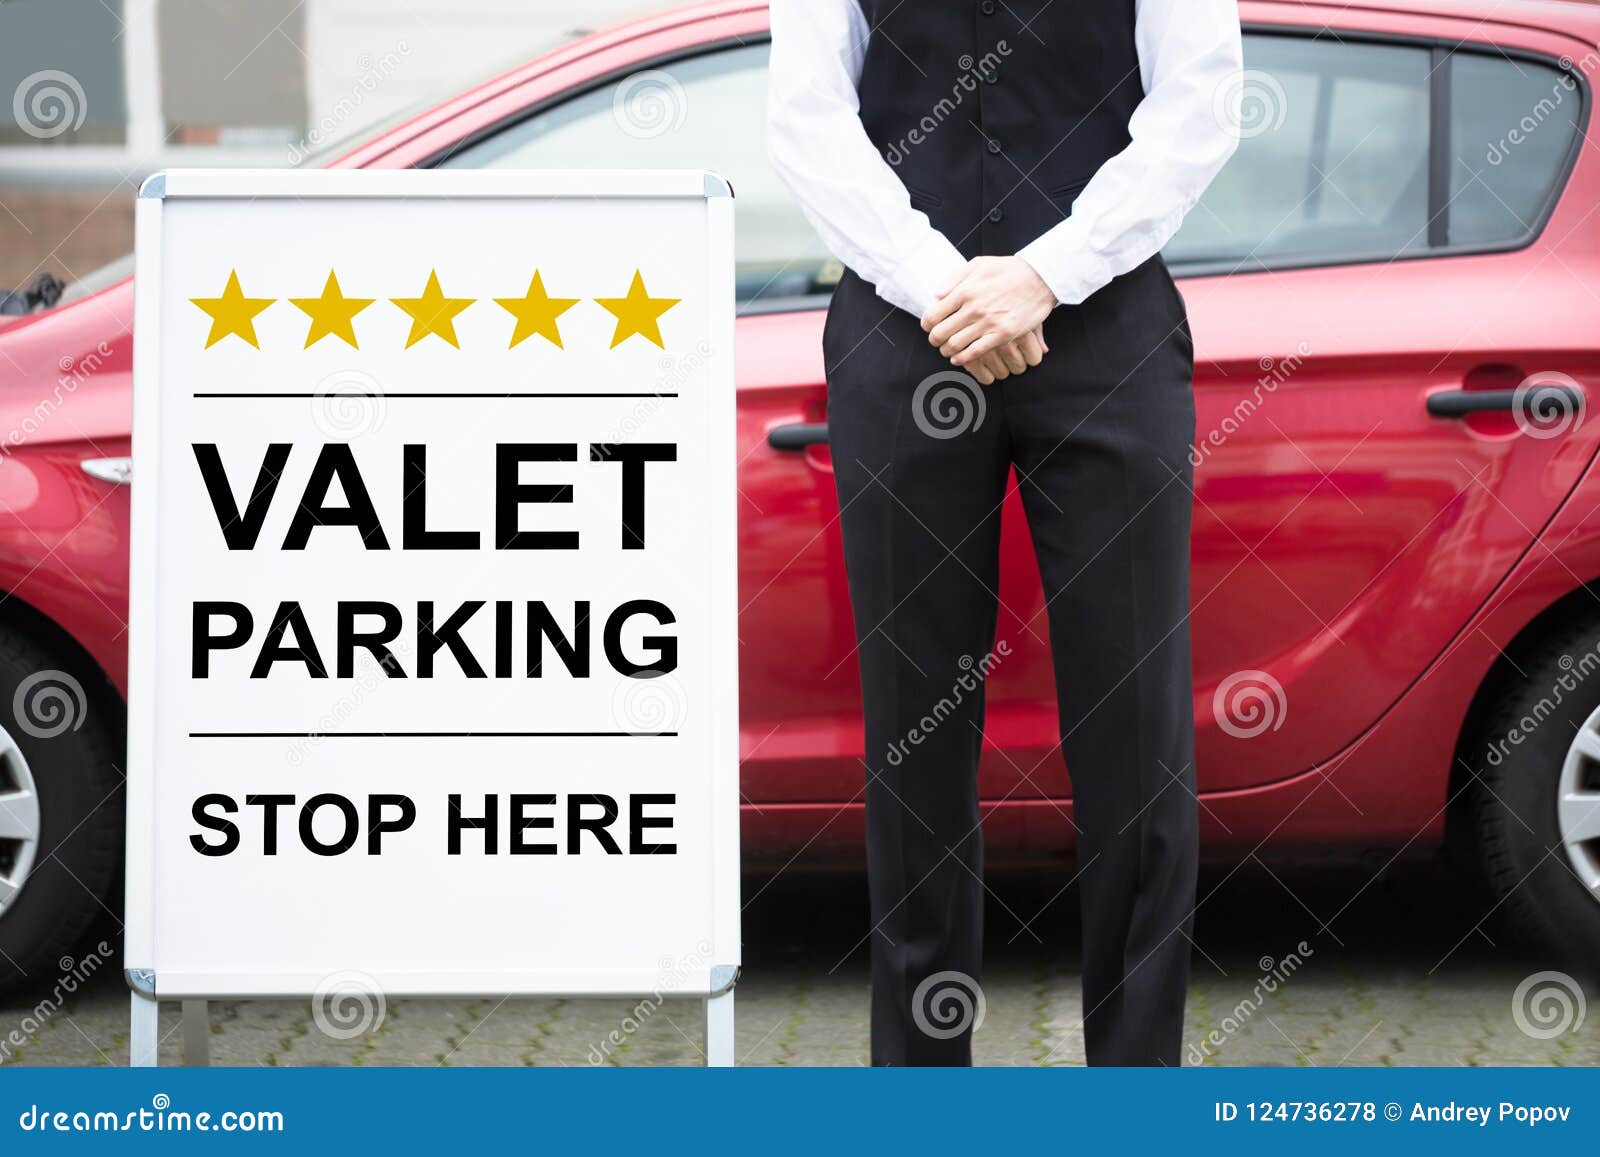 young male valet standing near parking sign close up 124736278